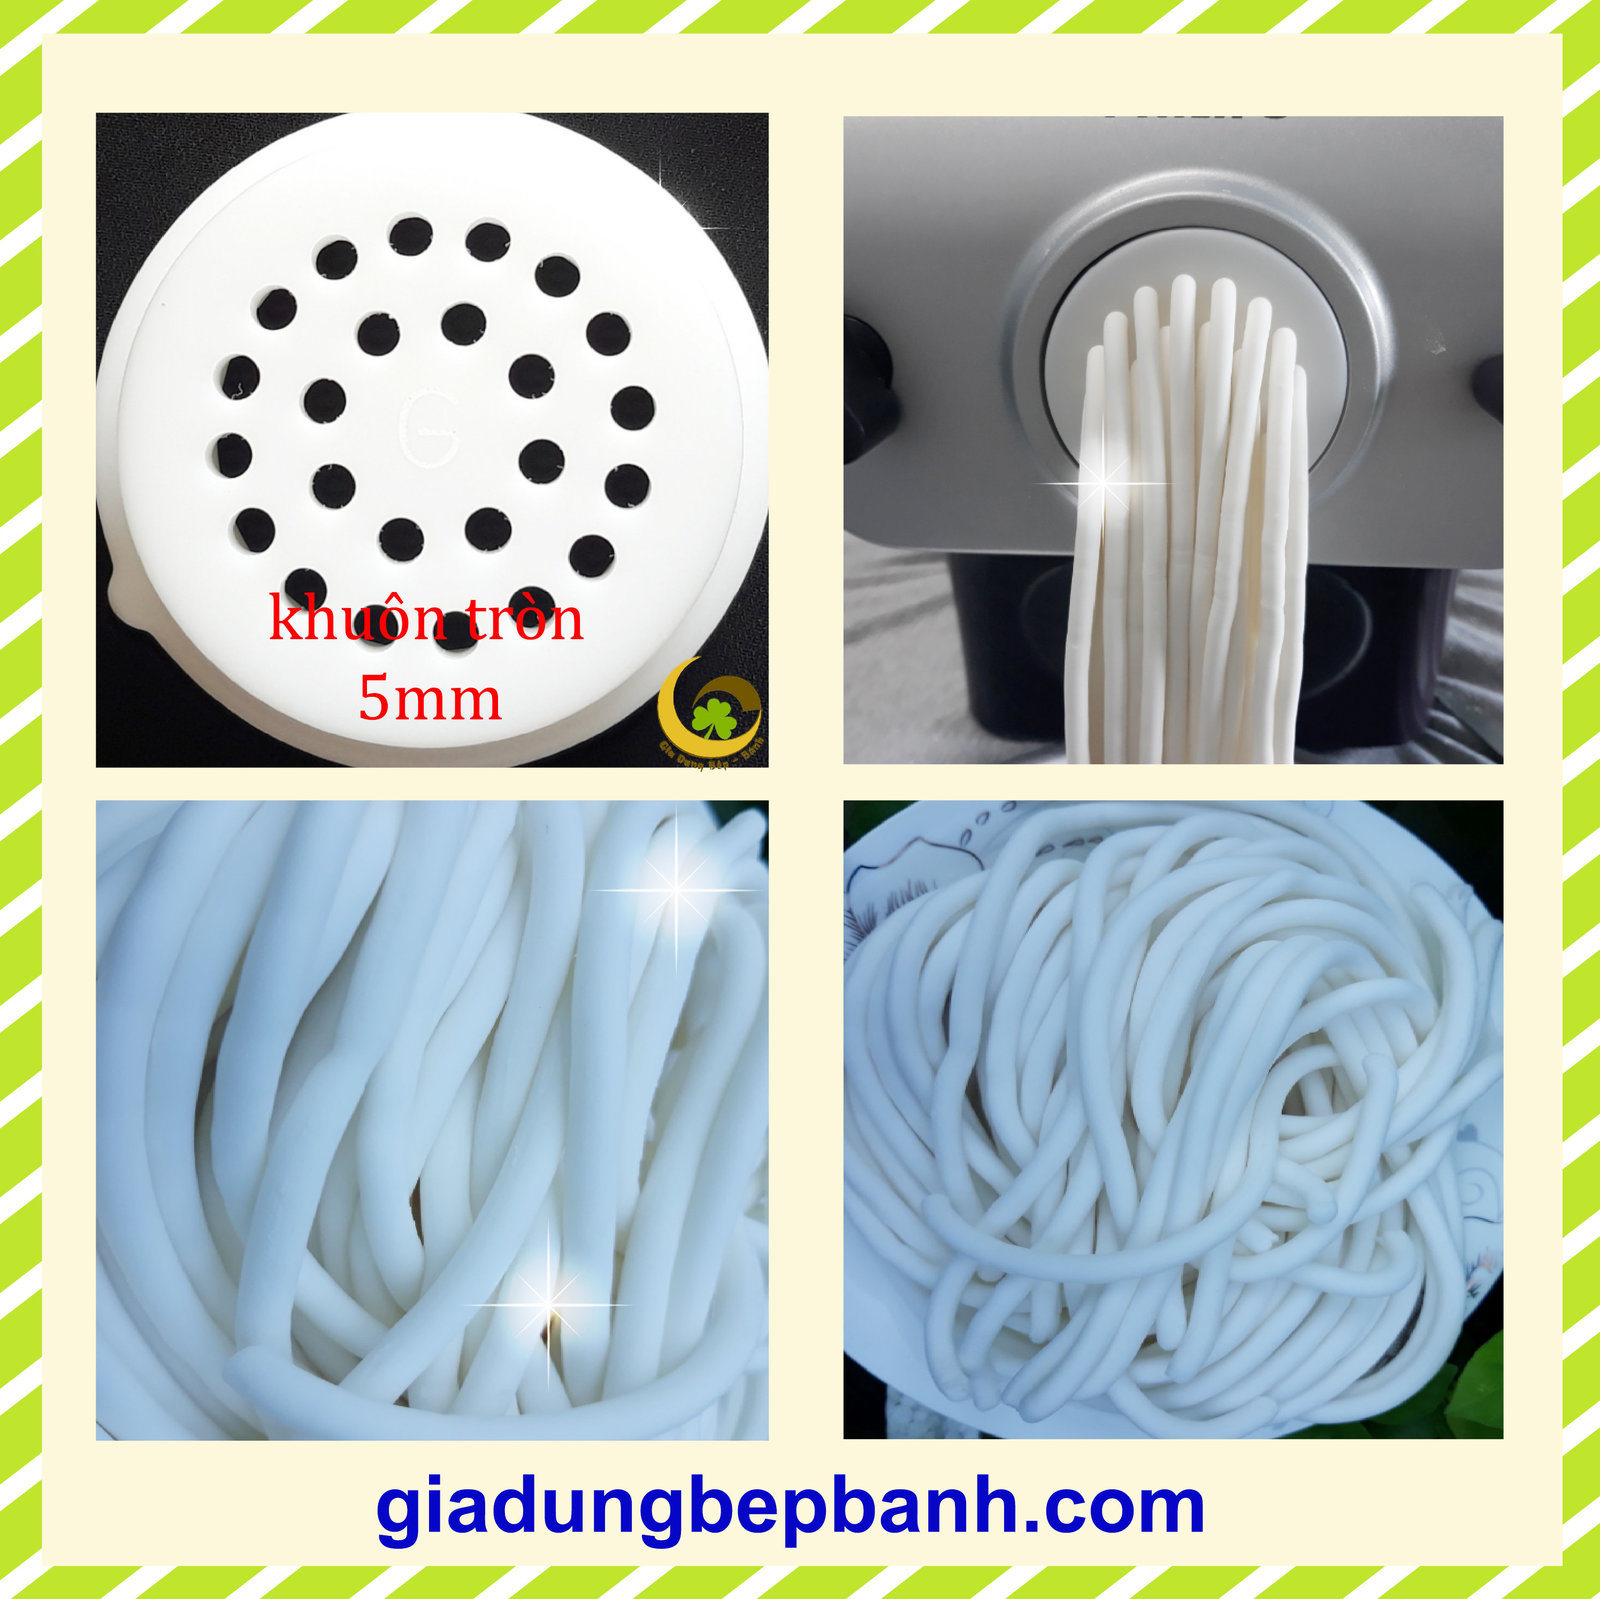 Bucatini 5mm pasta disc/mold for Philips pasta maker O33 